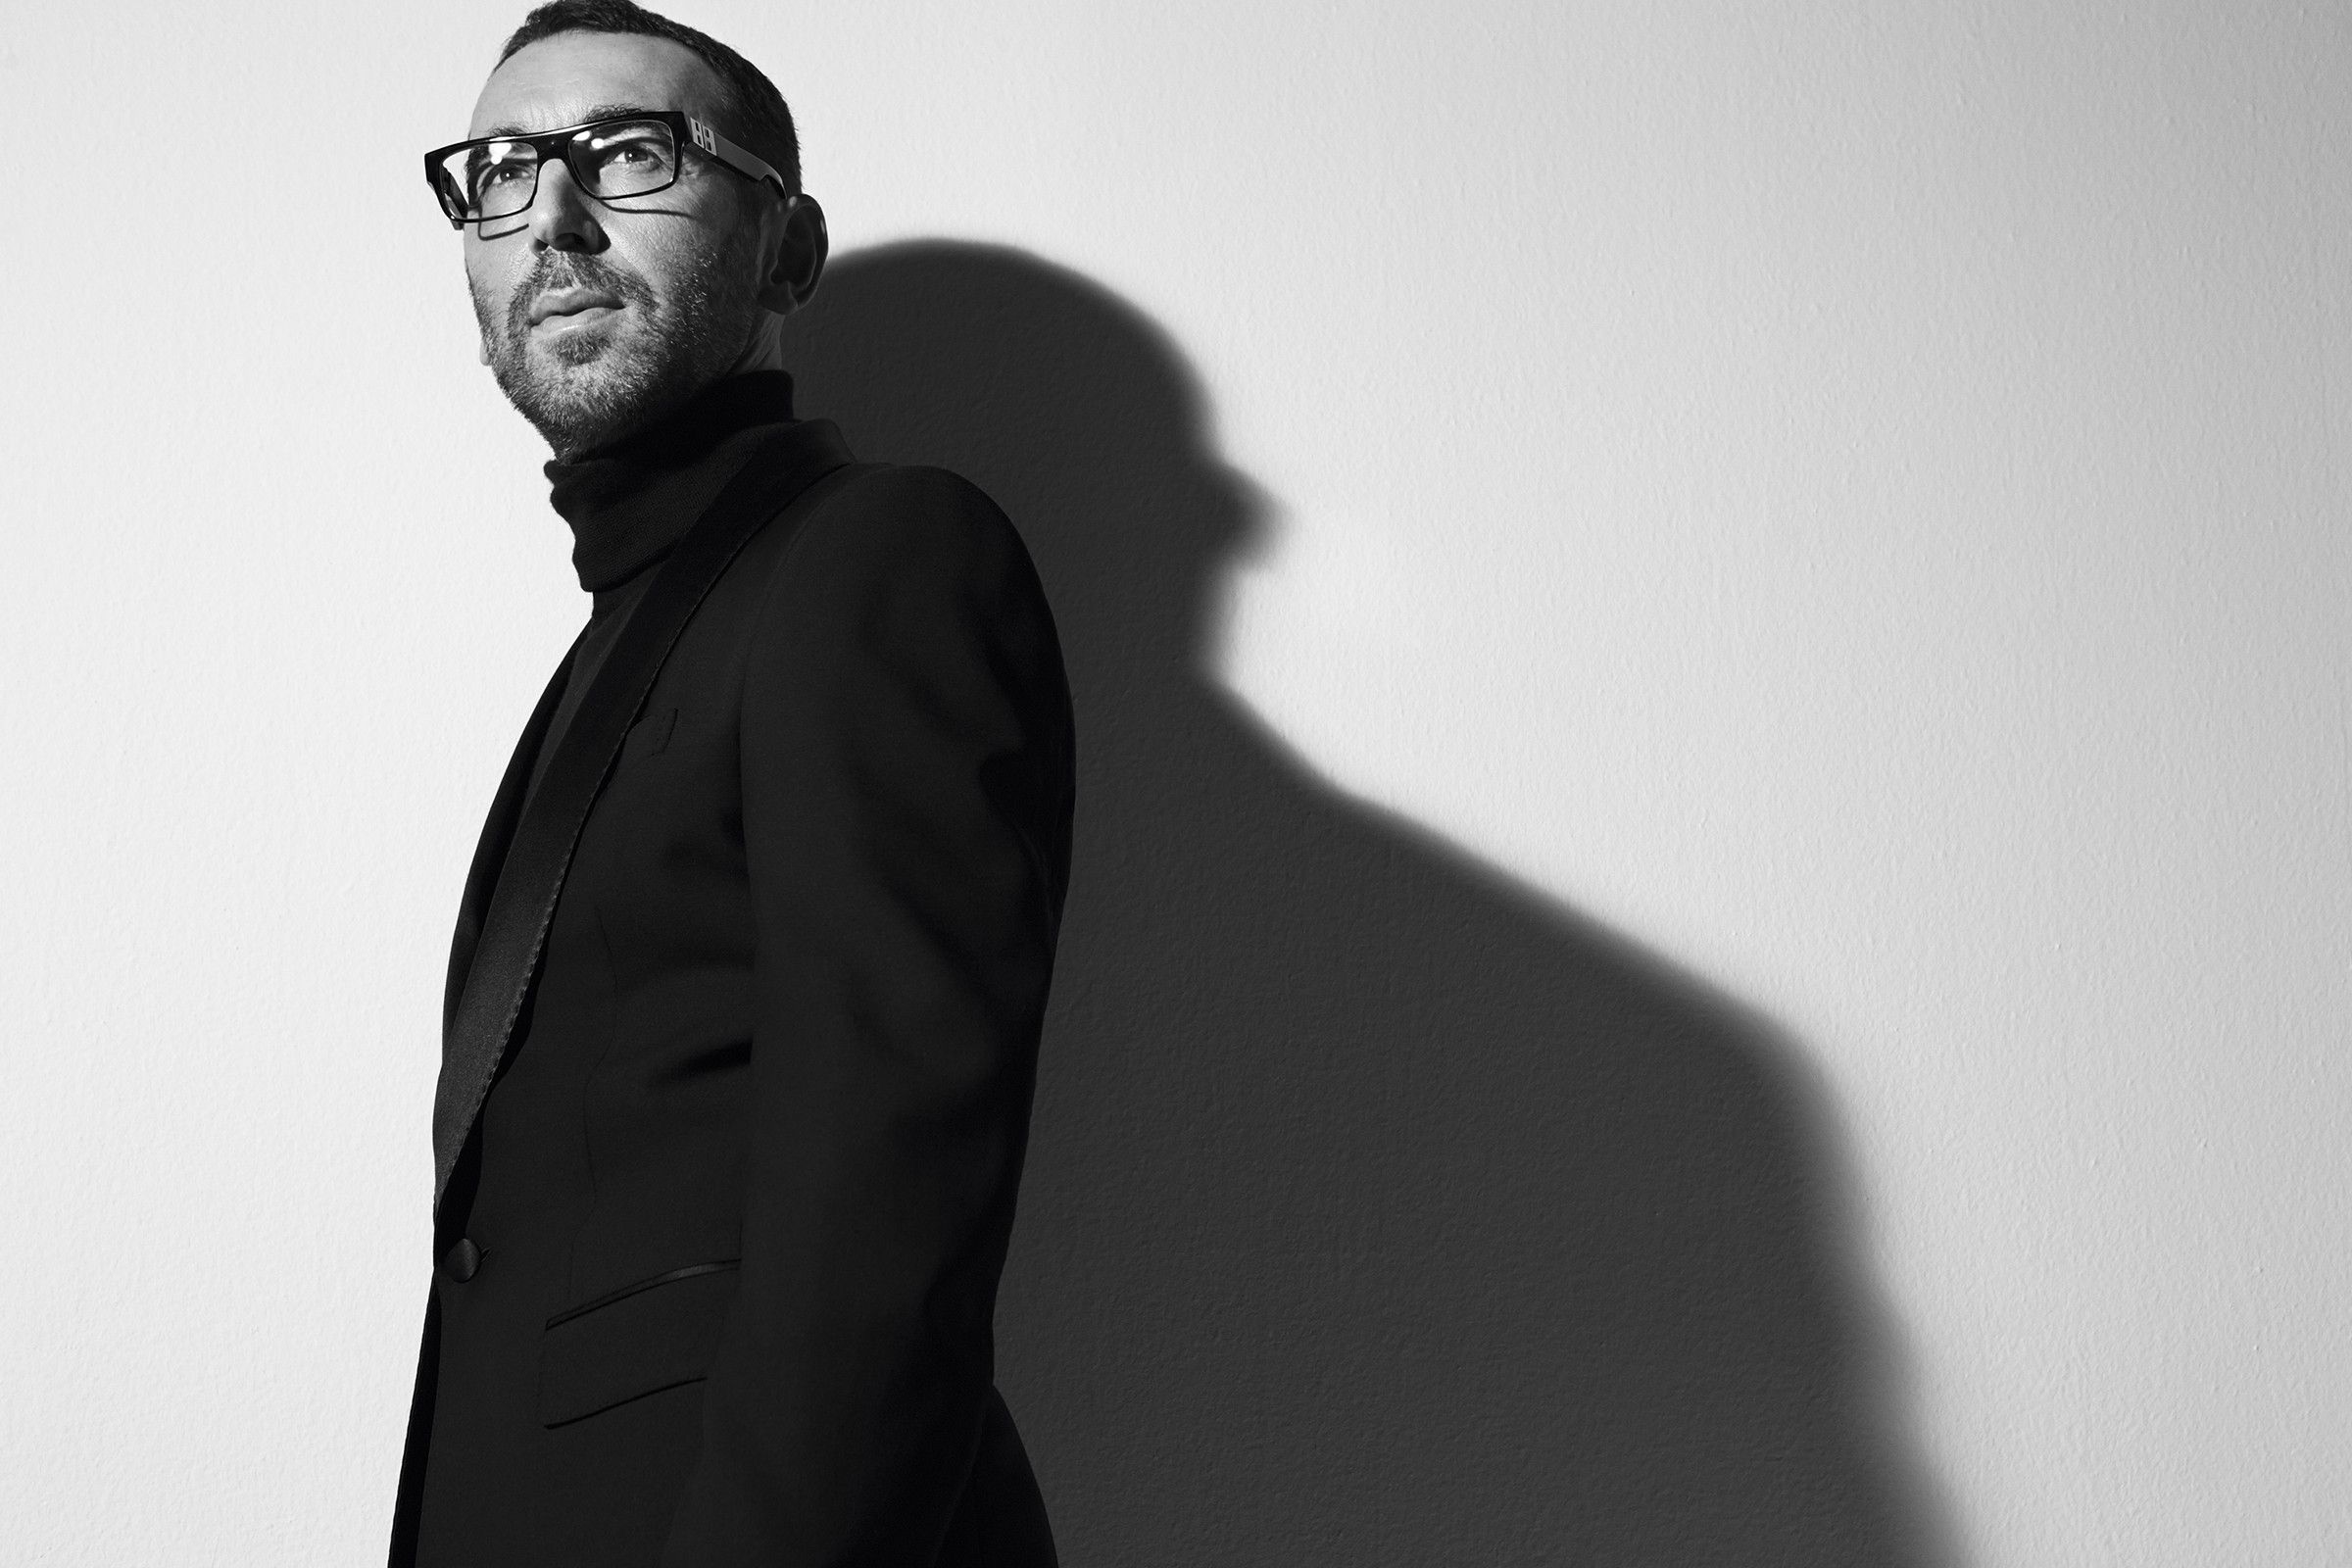 From A to Z | The Zegna: Alessandro Grailed Sartori Tale of